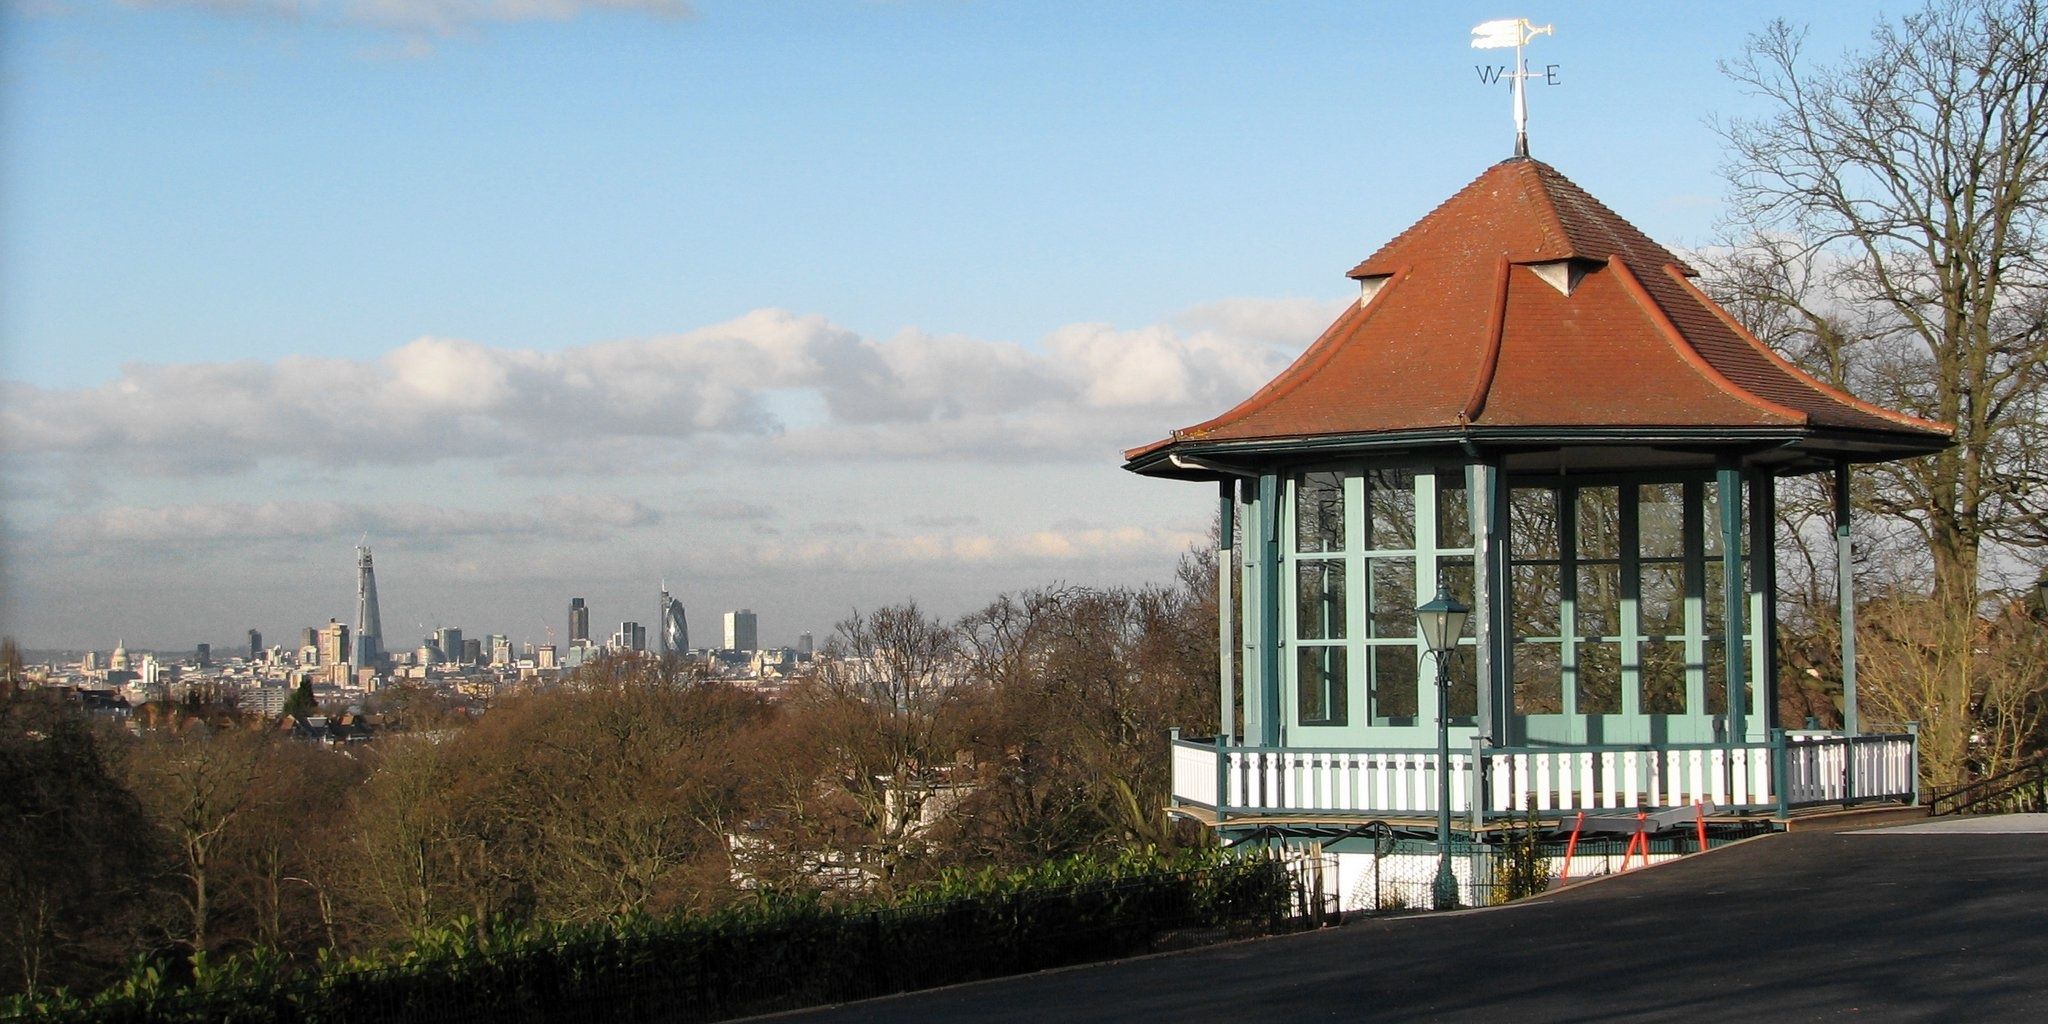 Forest Hill - views over London from gardens bandstand at Horniman Museum